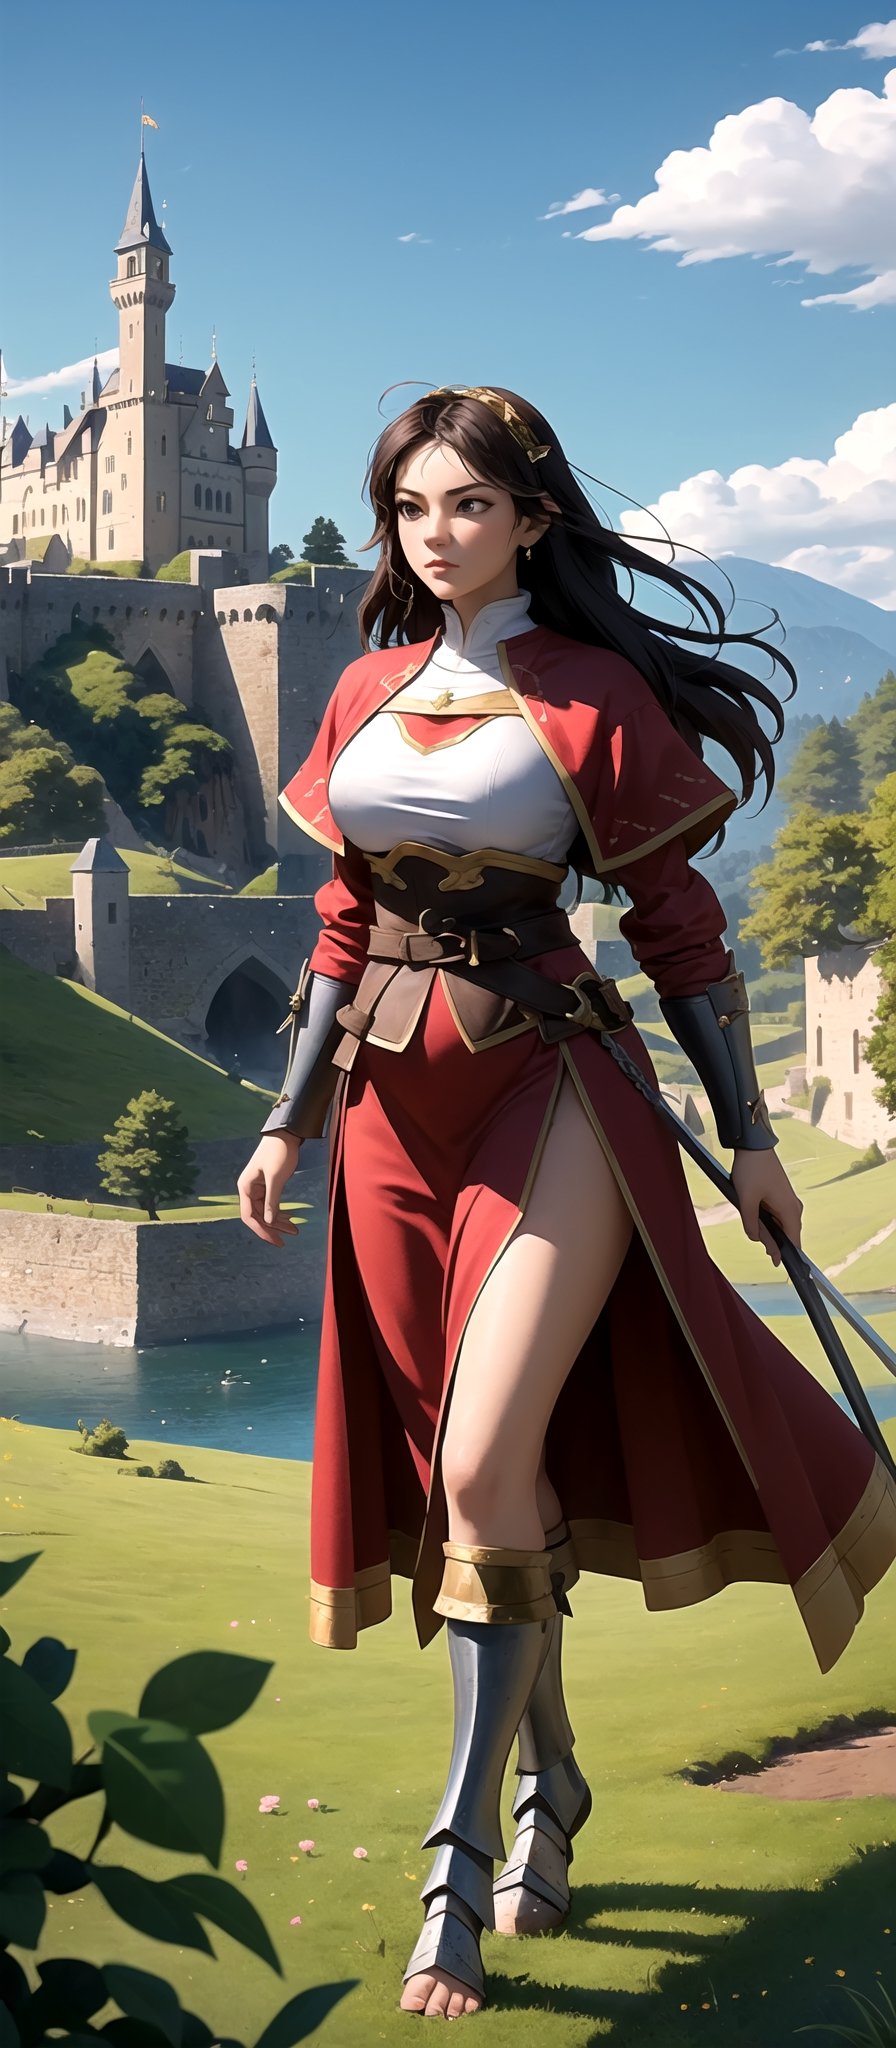 "Capture the essence of epic clashes and scenic beauty with this battle wallpaper, (((Picture a beautiful oung female warrior walking through a medieval battleground))). In the background, a majestic stone castle overlooks a tranquil lake, while sheep graze peacefully in a lush garden. Towering mountains frame the horizon under a picturesque sky. This scene, inspired by Age of Empires, combines the thrill of speed with the grandeur of medieval times, creating a truly captivating wallpaper
 